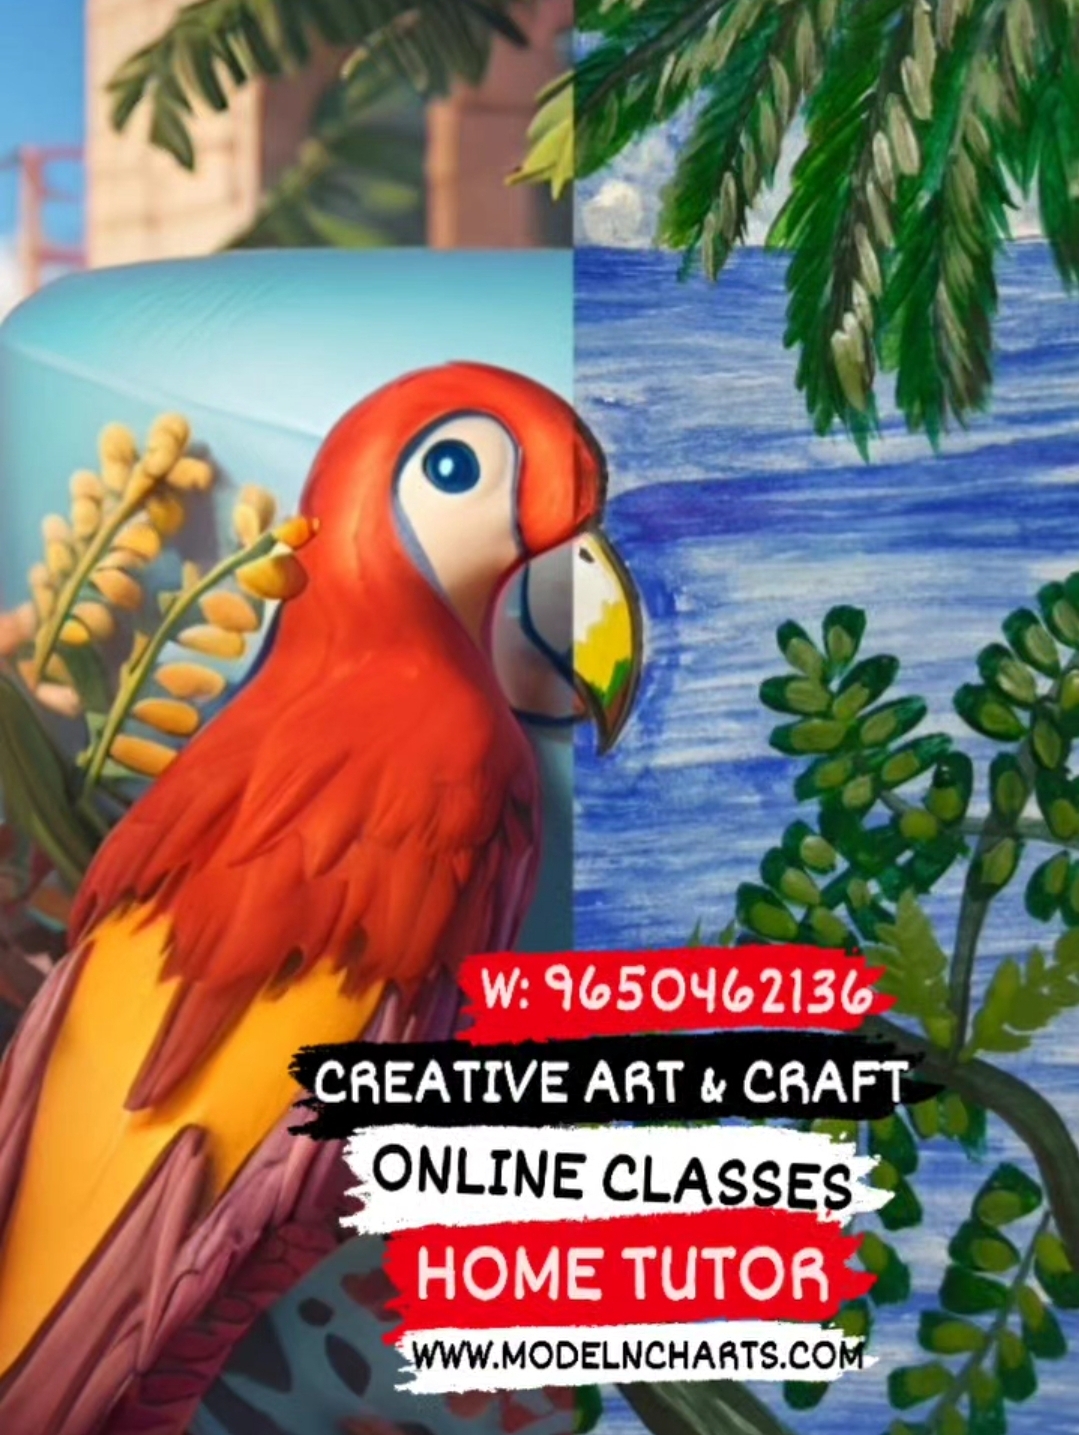 Learn Online Art & Craft Classes - For 4-14 Yrs Old At ₹333/Class Book Now W: 9650462136, 9312499180.